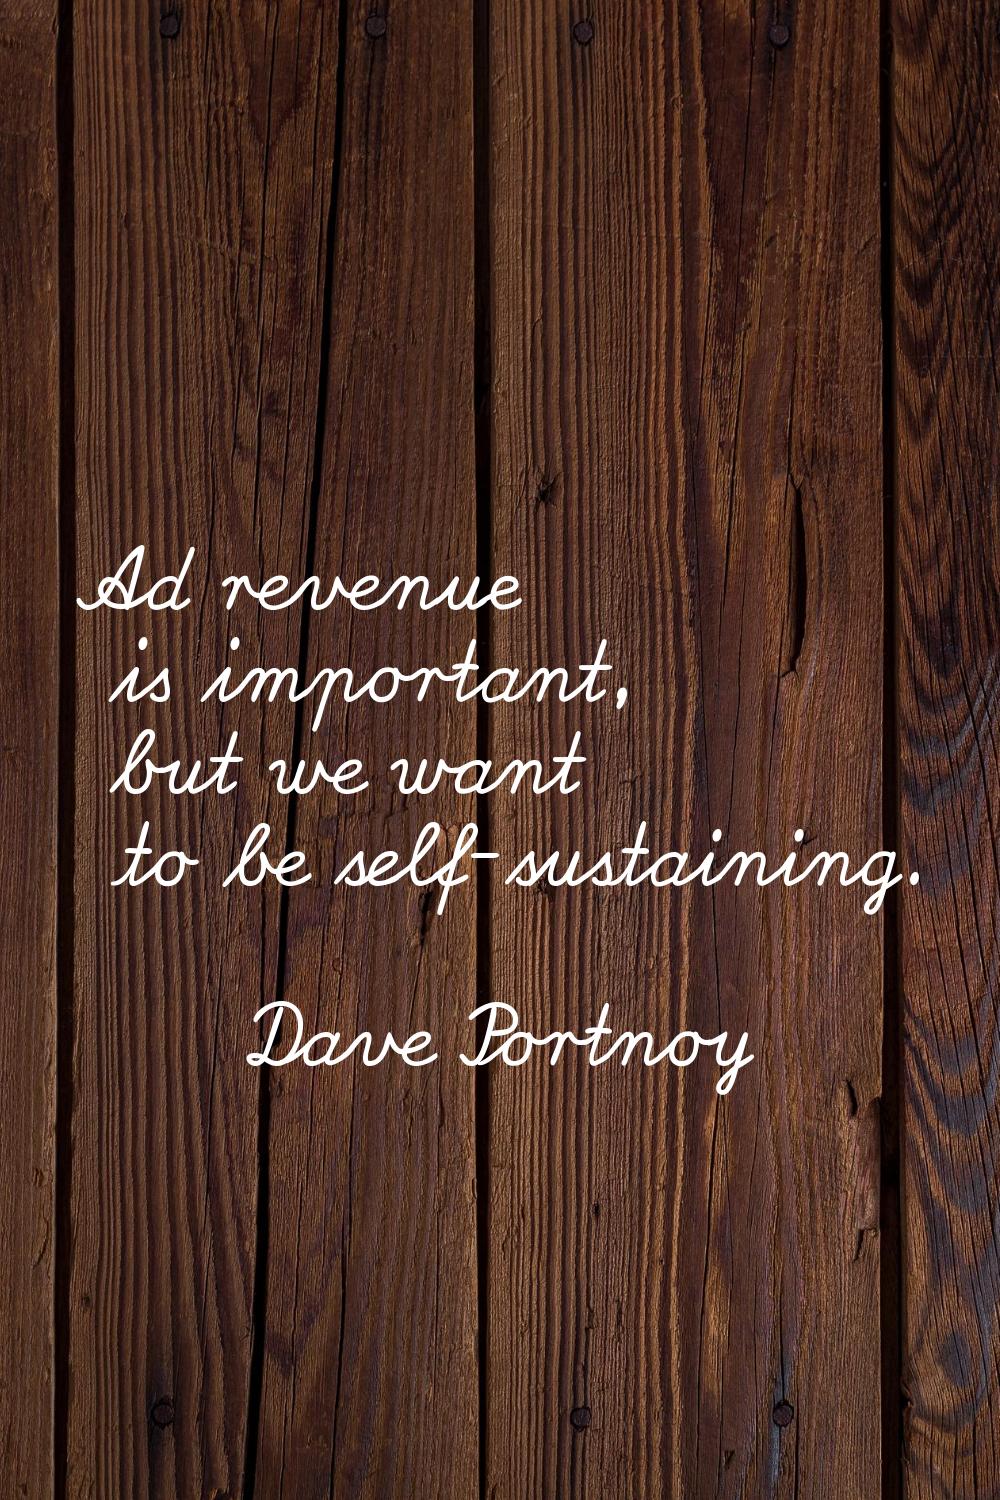 Ad revenue is important, but we want to be self-sustaining.